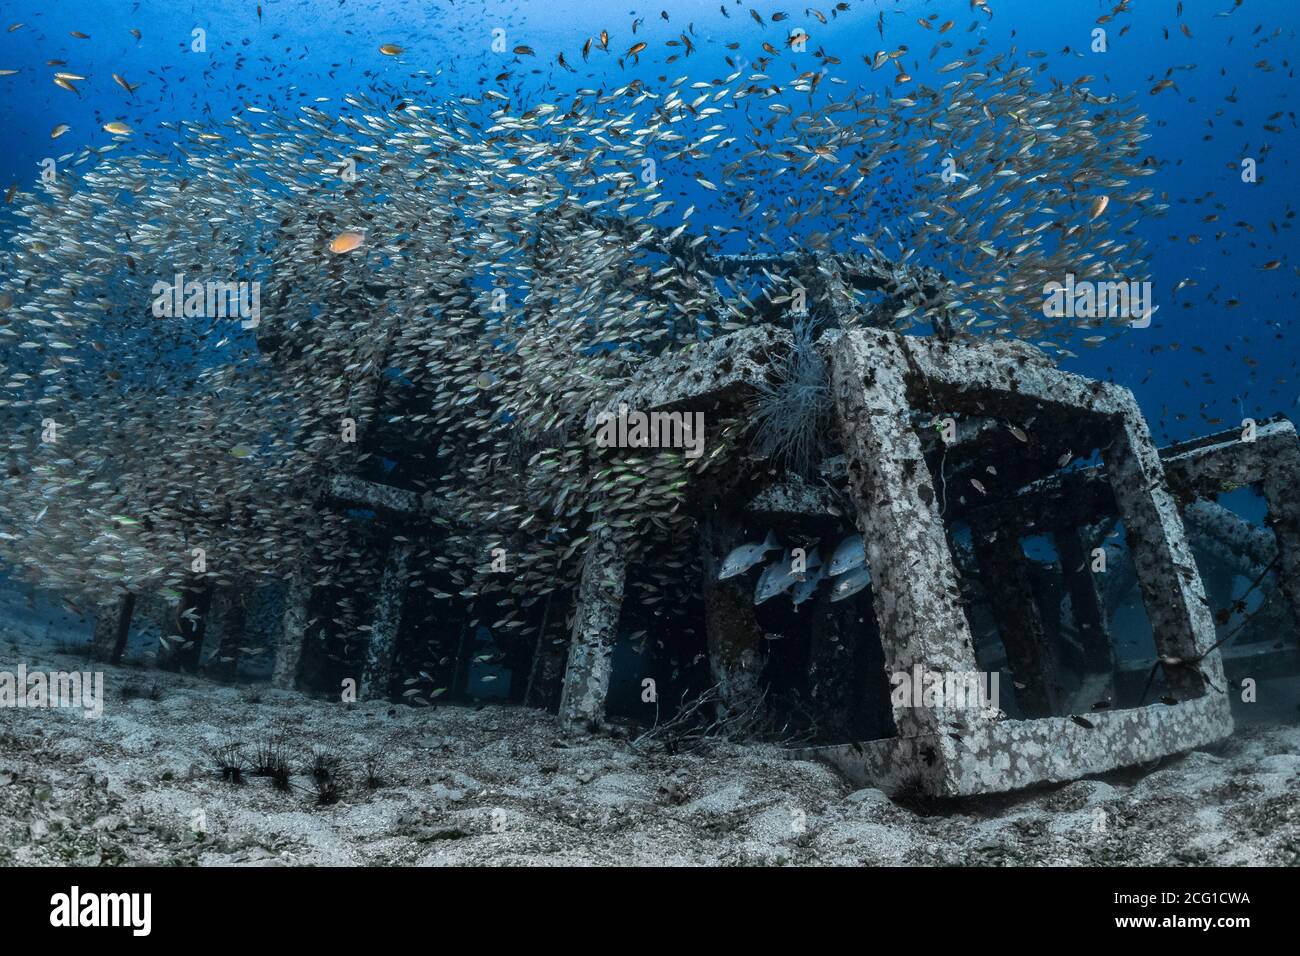 Big school of fish on manmade artificial reef  Stock Photo